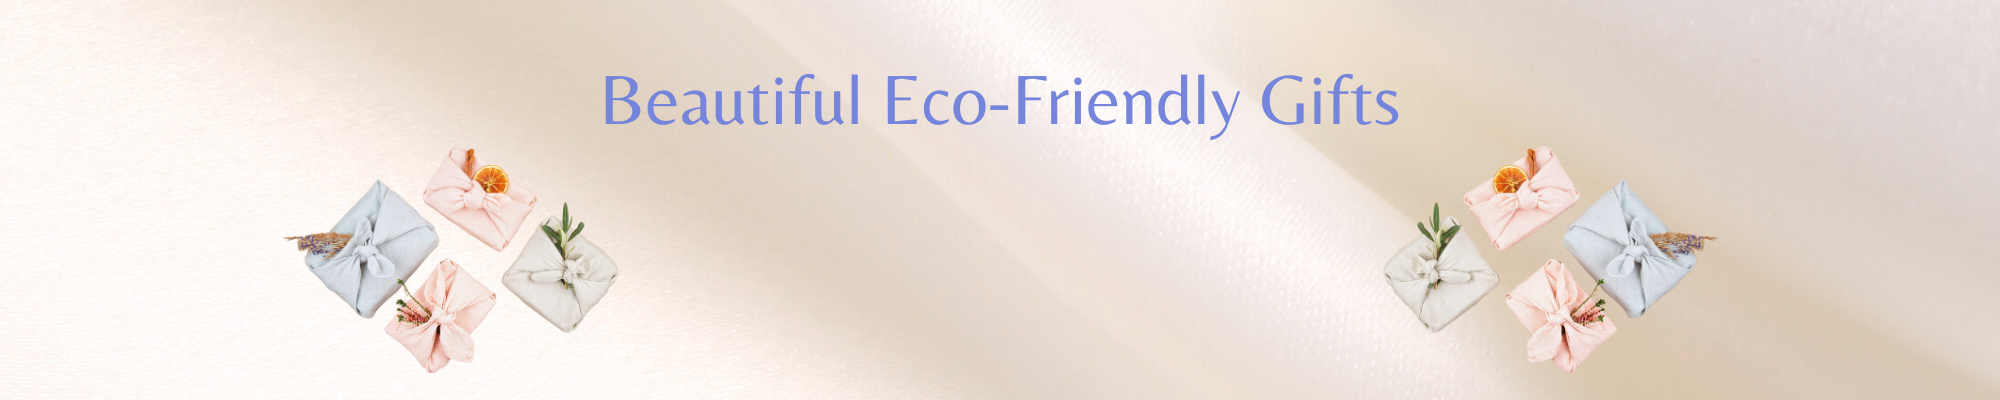 Twizzle Designs is an eco-friendly gifts online store and a proud Australian business. Quality, sustainable, Australian made gifts for eco aware friends. An Earth friendly business.